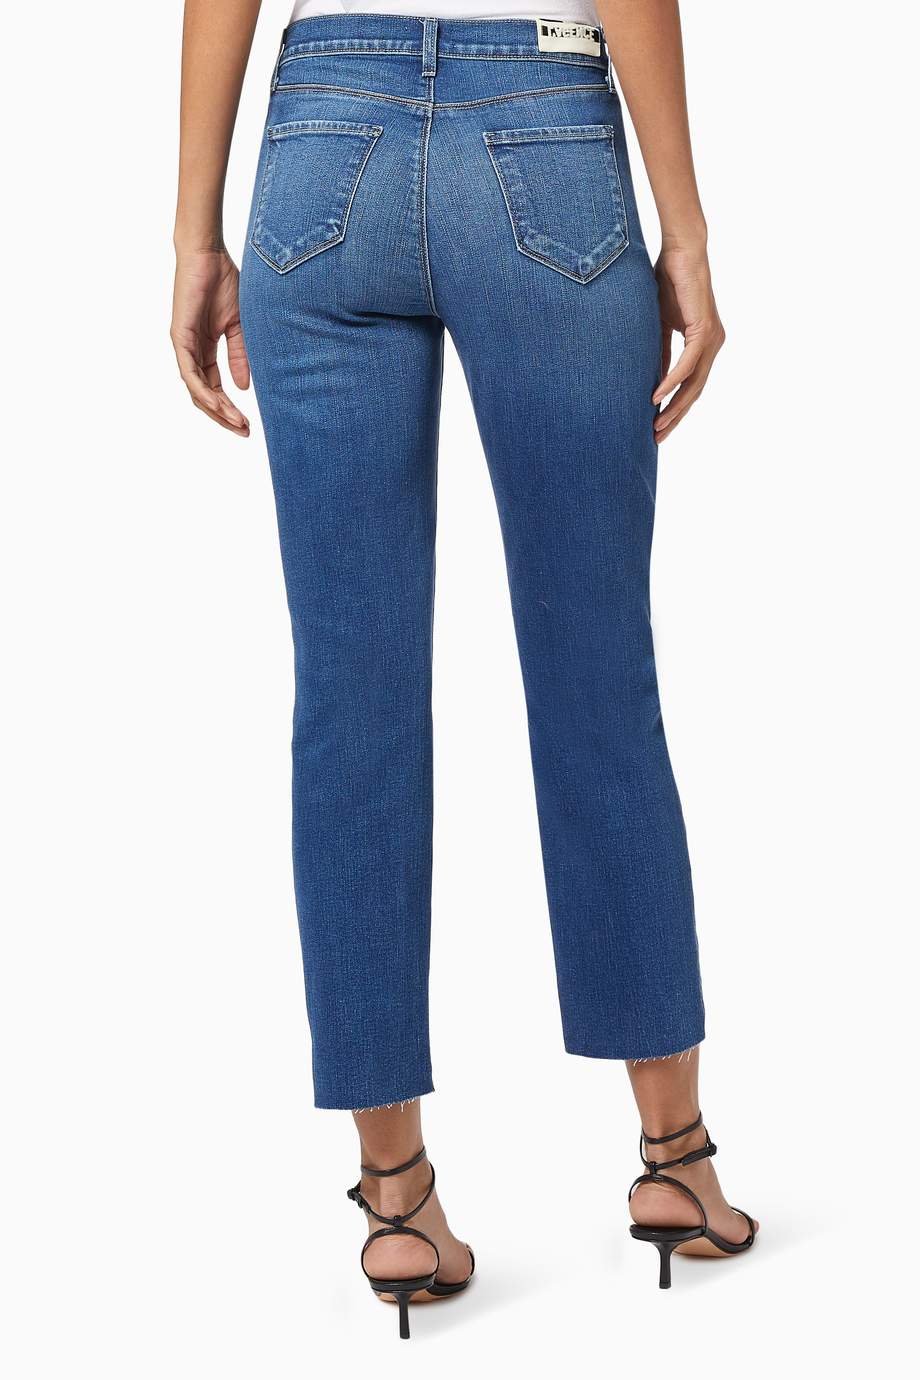 Shop L'agence Blue Cropped Slim-fit Jeans for Women | Ounass UAE